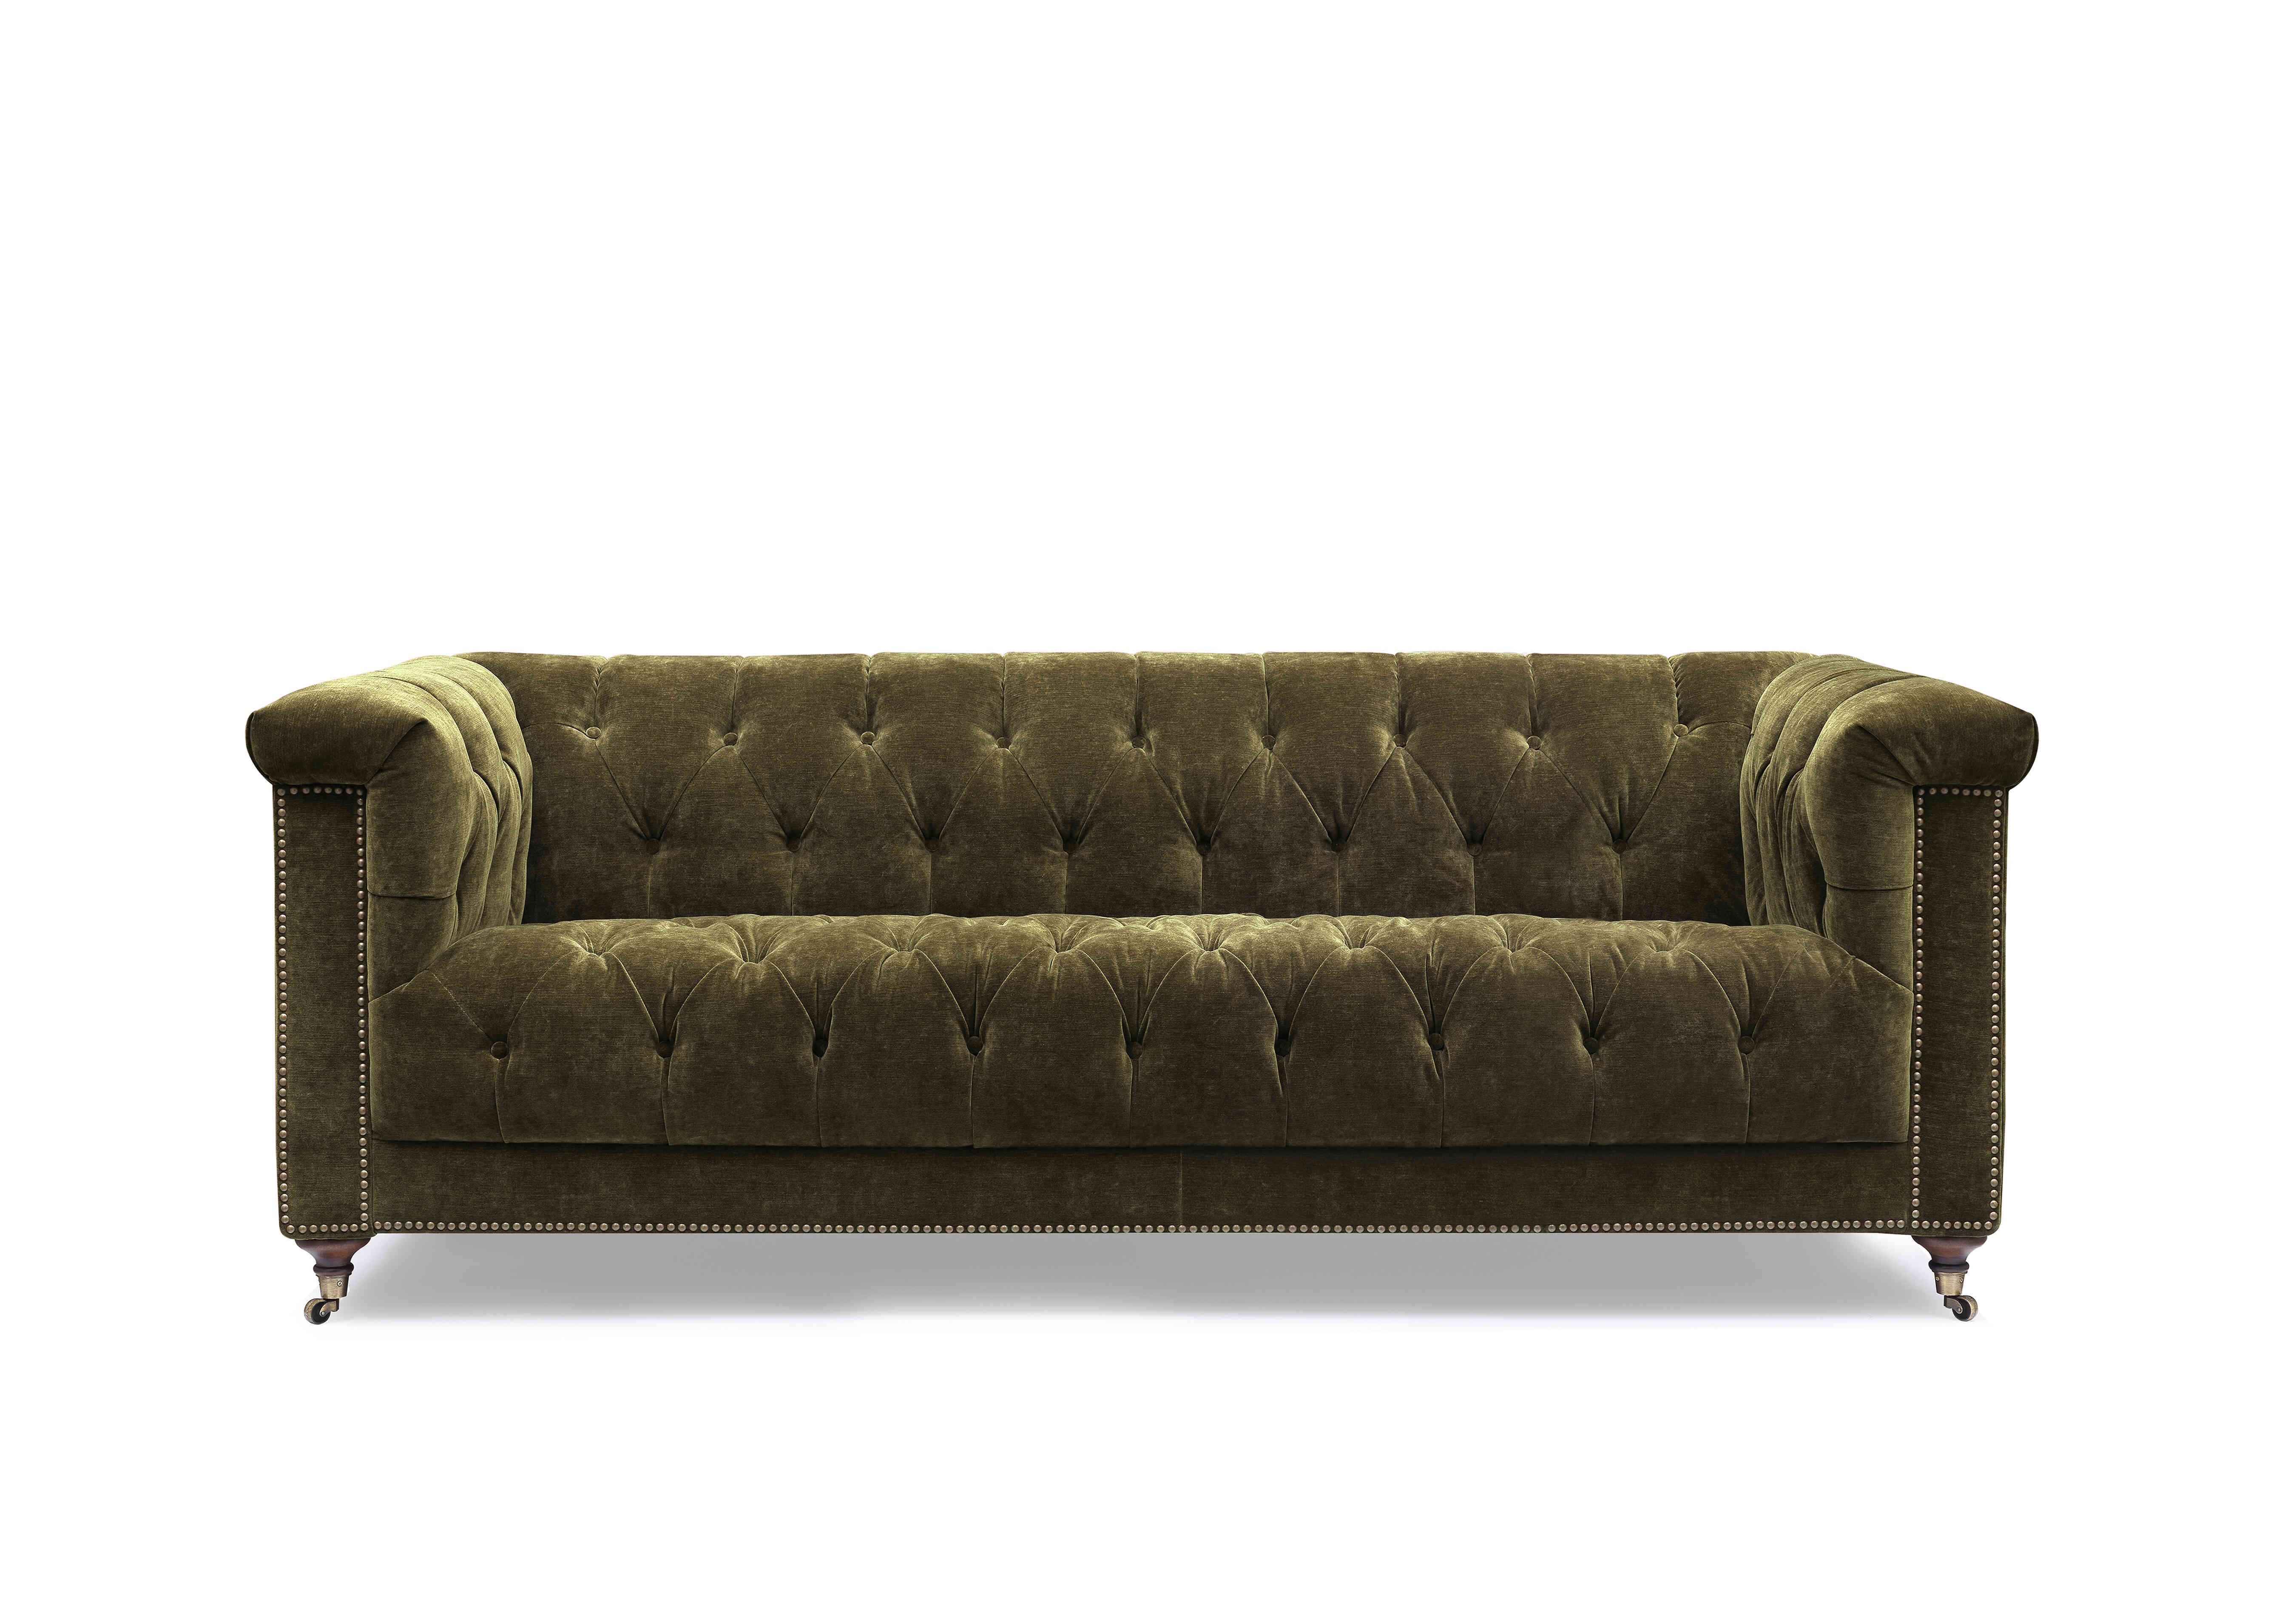 Wallace 3 Seater Fabric Chesterfield Sofa with USB-C in X3y1-W018 Pine on Furniture Village